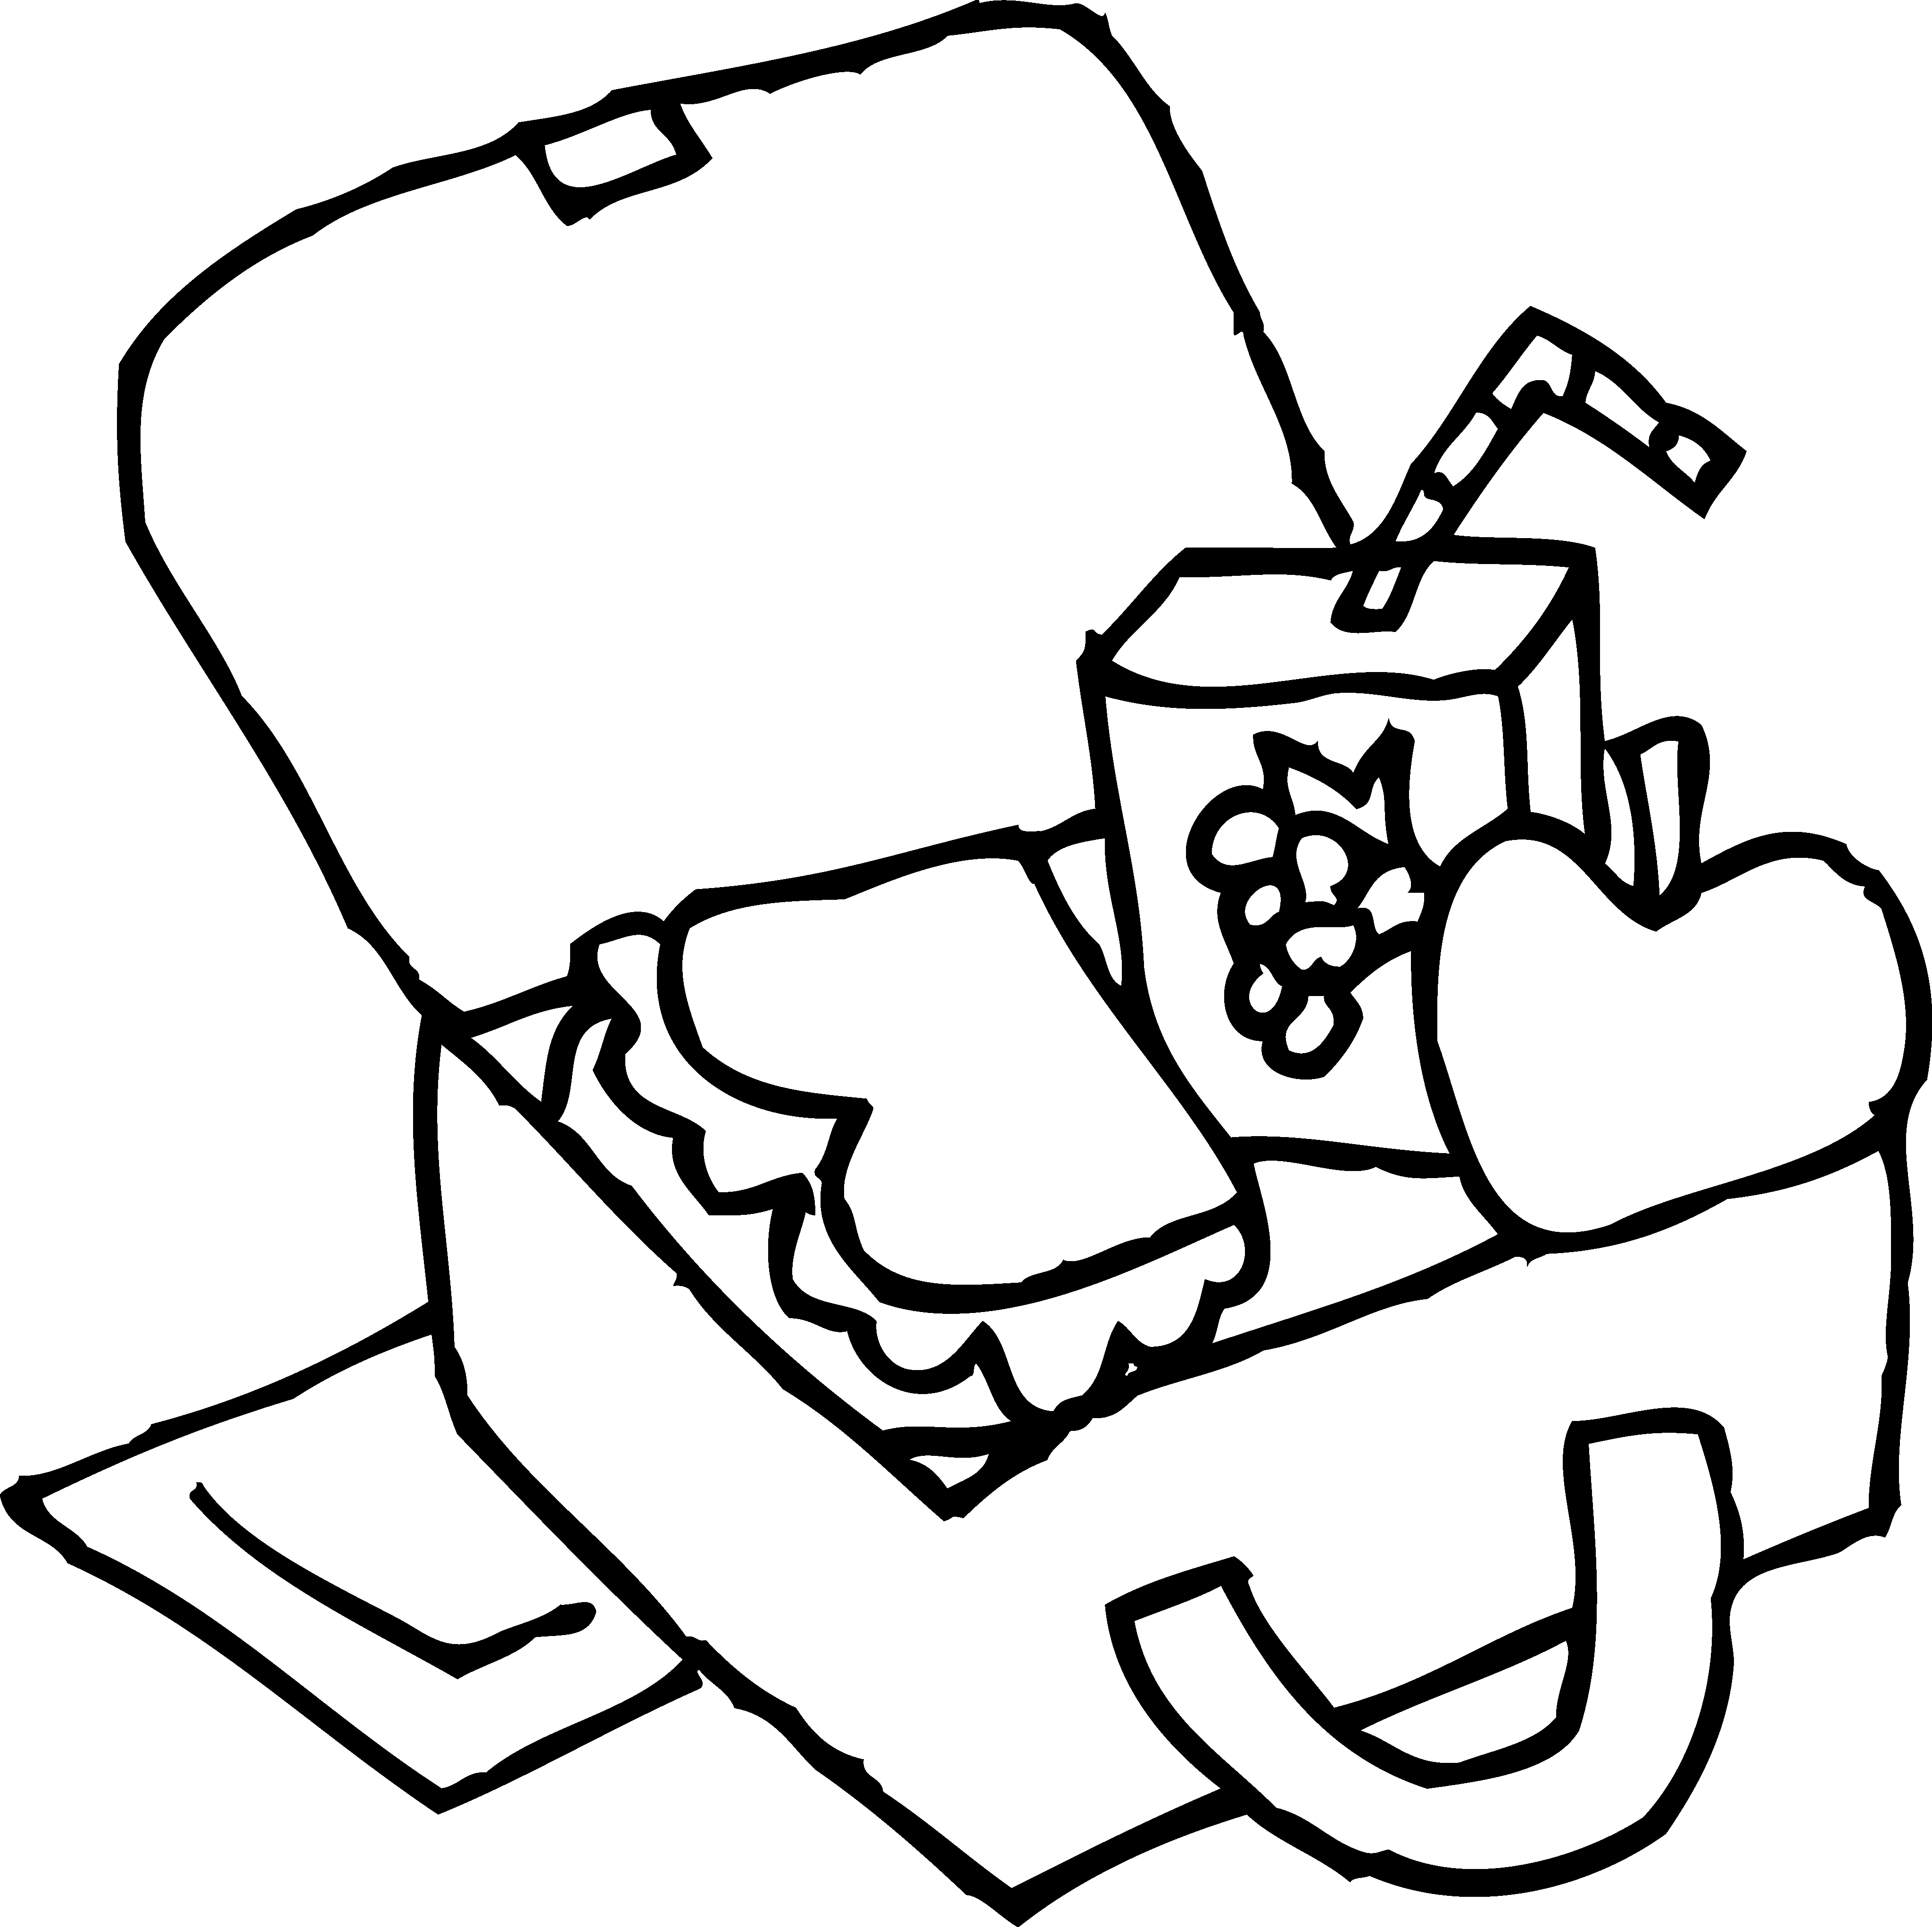 Lunch Box Clipart Black And White | Clipart library - Free Clipart 